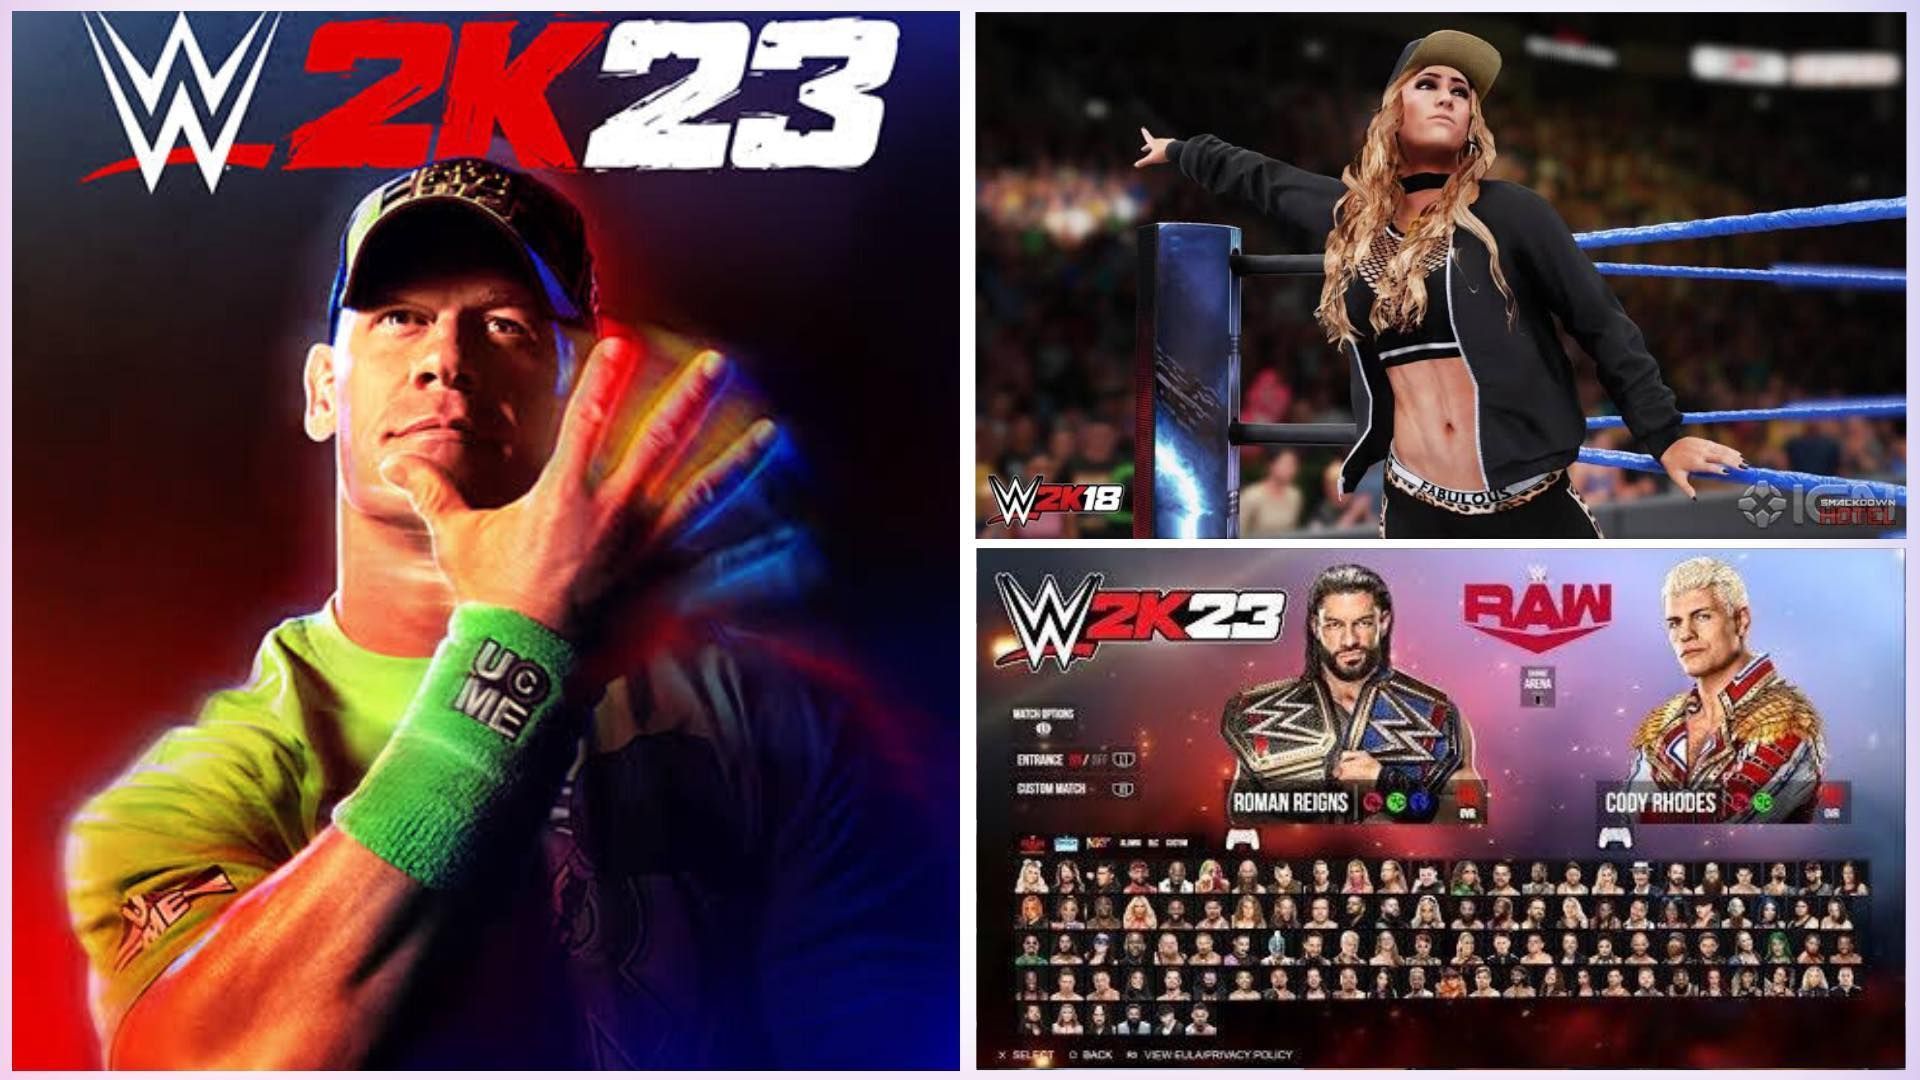 WWE 2K23 game is set to release in March this year.